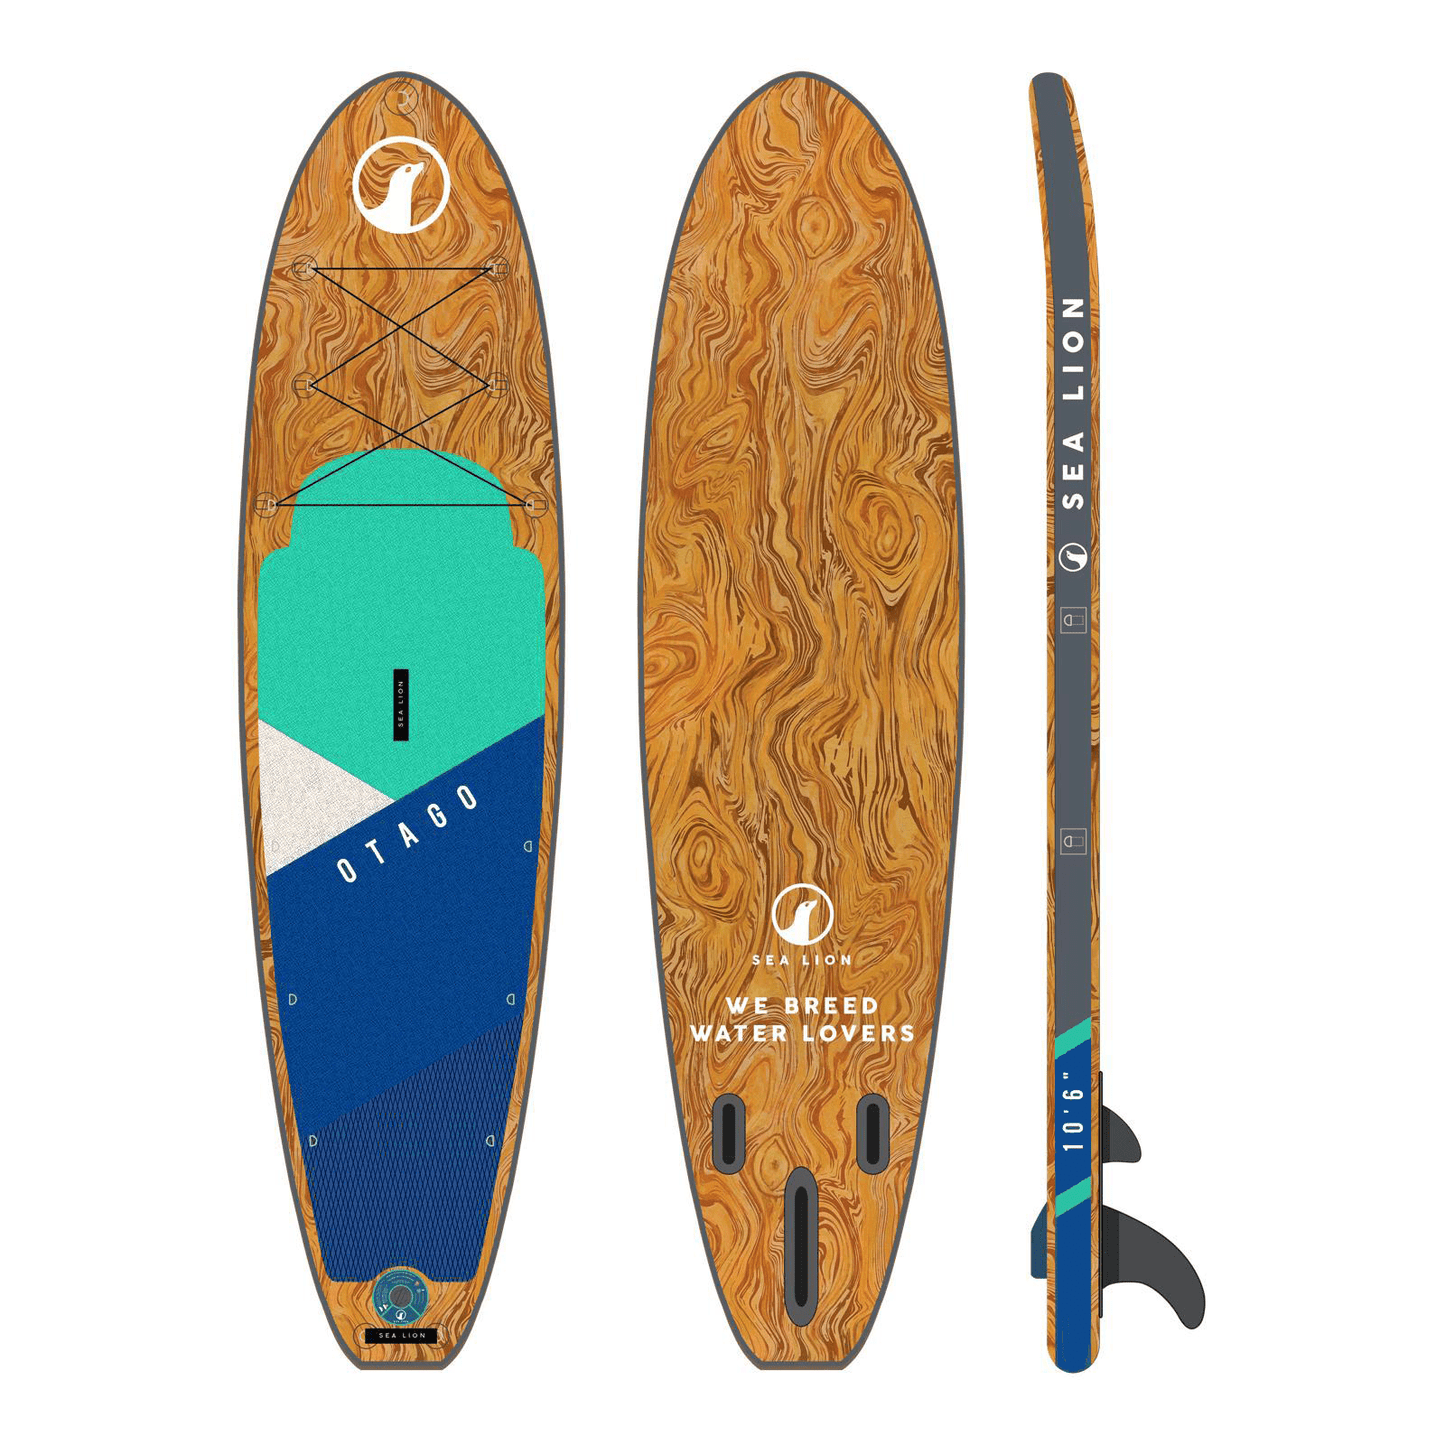 10'6" Otago - Inflatable SUP Board + 3 Piece Paddle